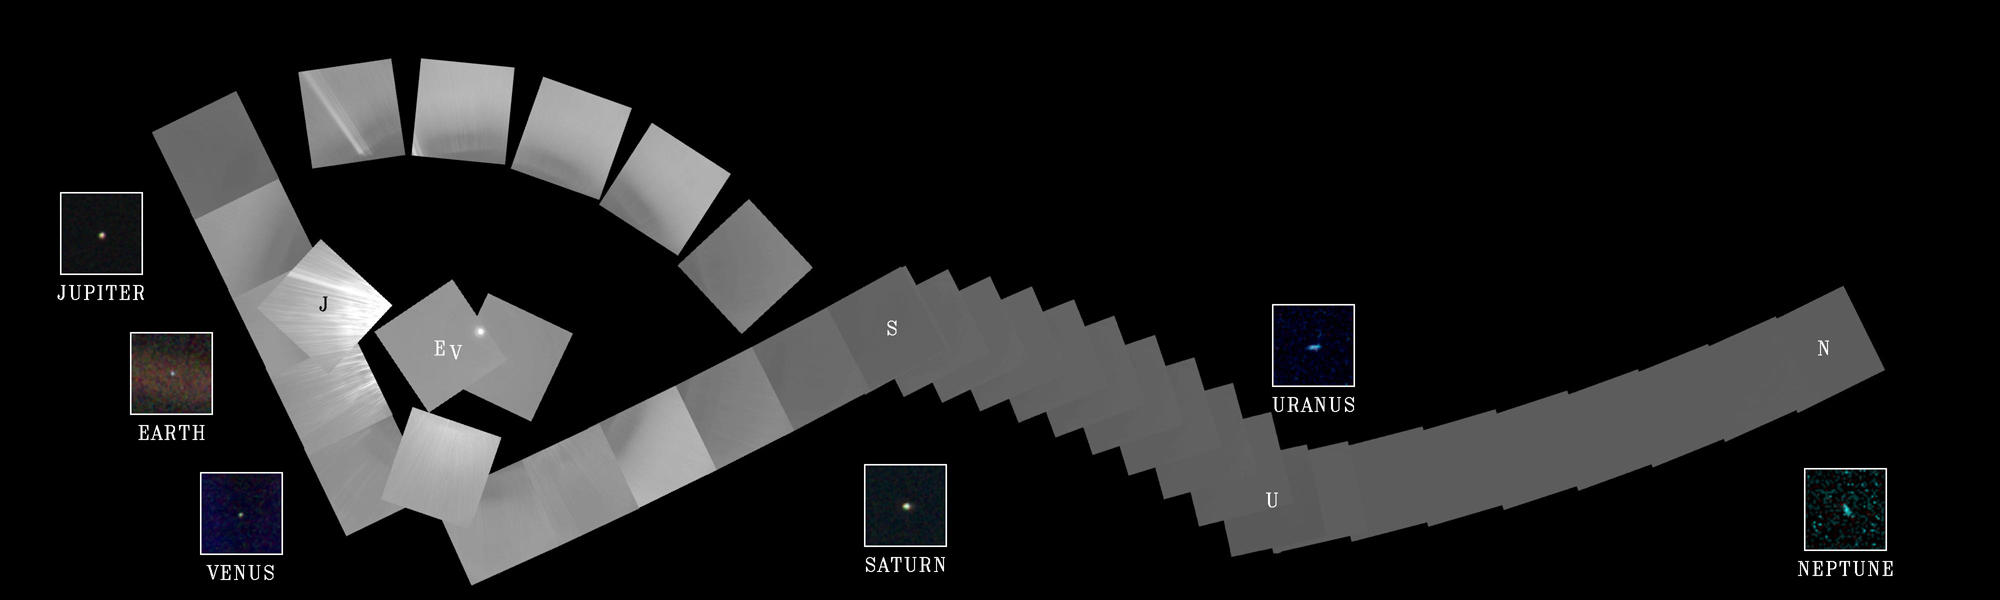 things are finally looking up for the voyager 1 interstellar spacecraft